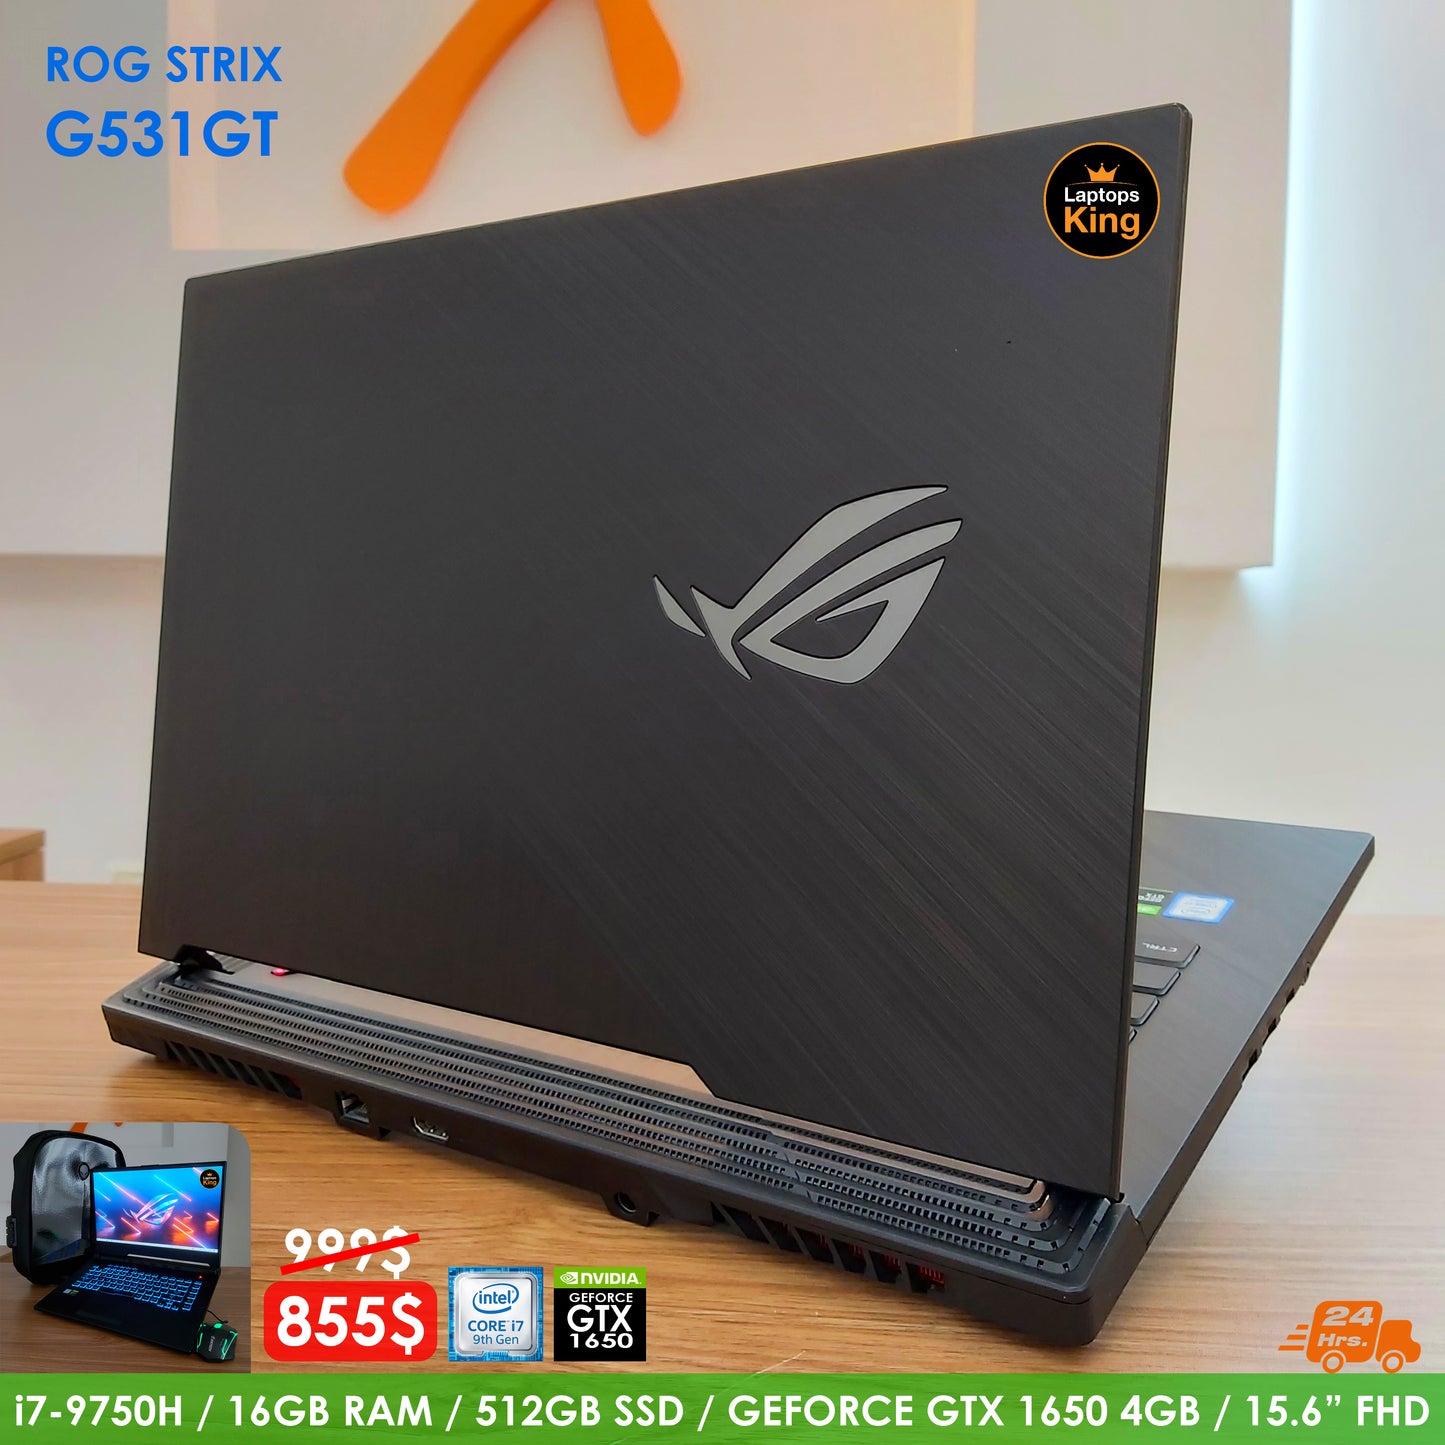 Asus Rog Strix G531GT i7-9750H GTX 1650 Gaming Laptop (Used Just Like New with Box)